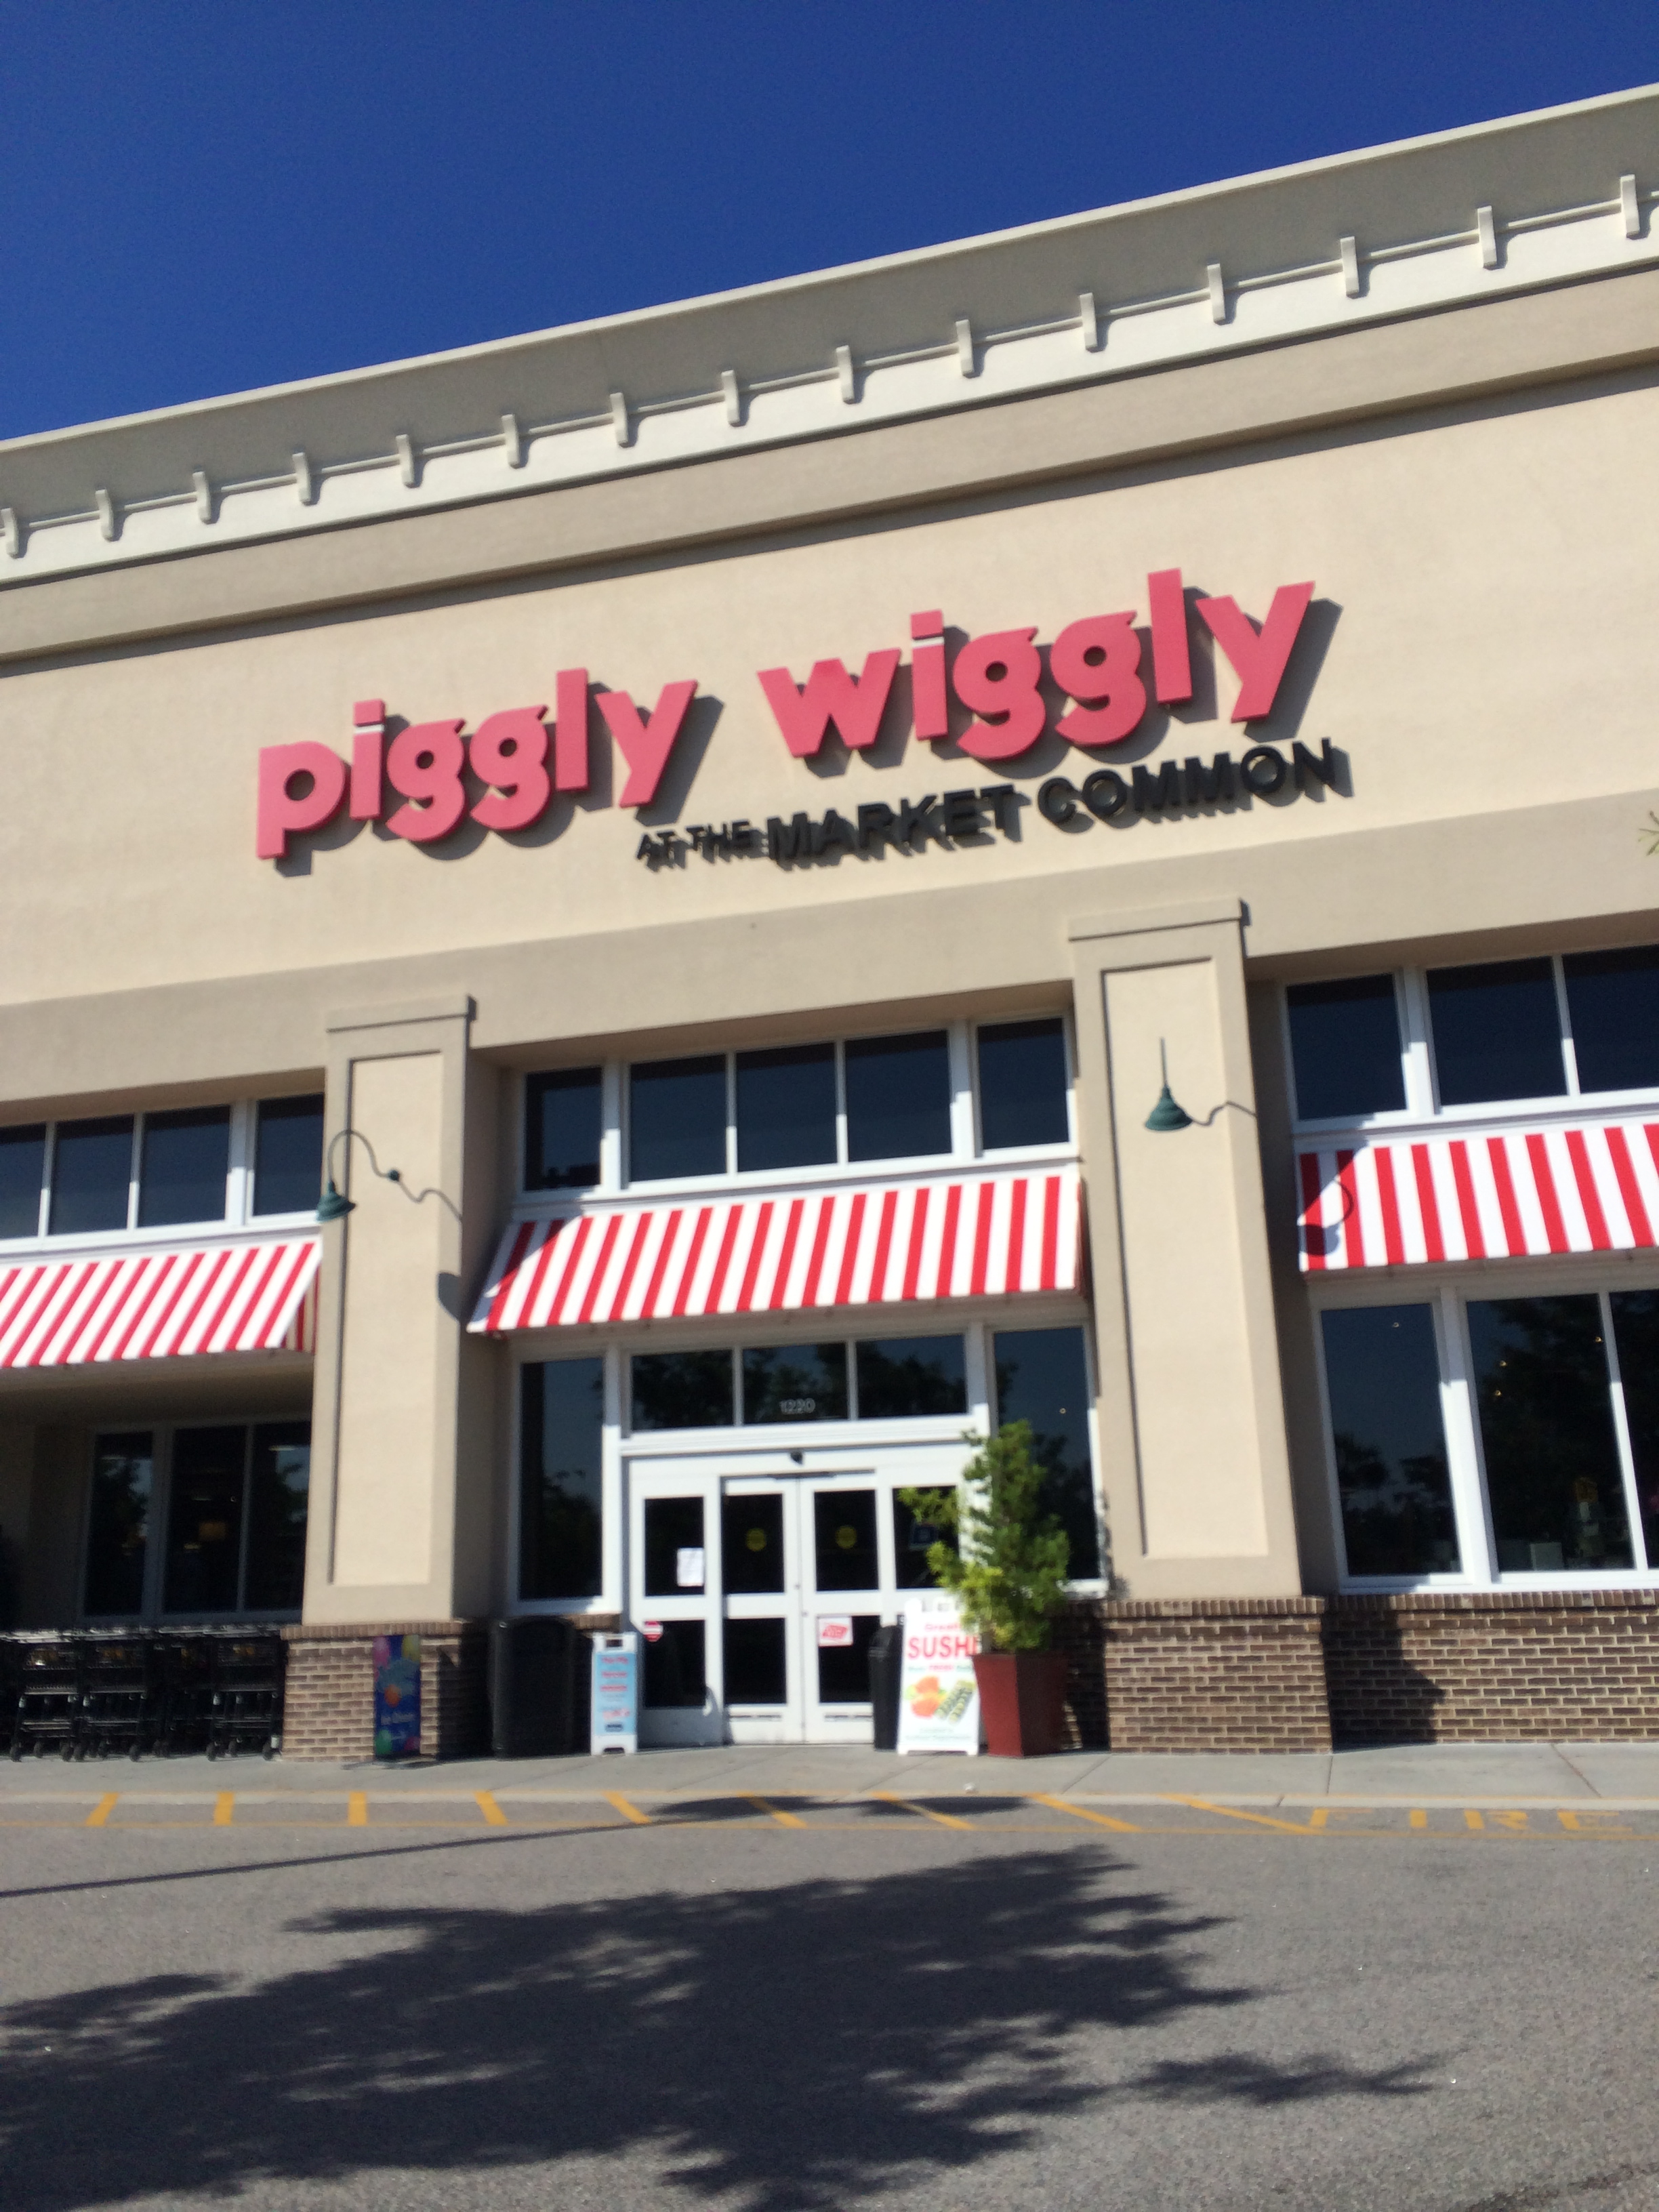 Piggly Wiggly is my neighborhood grocery store and where I went to purchase my southern snacks tonight.